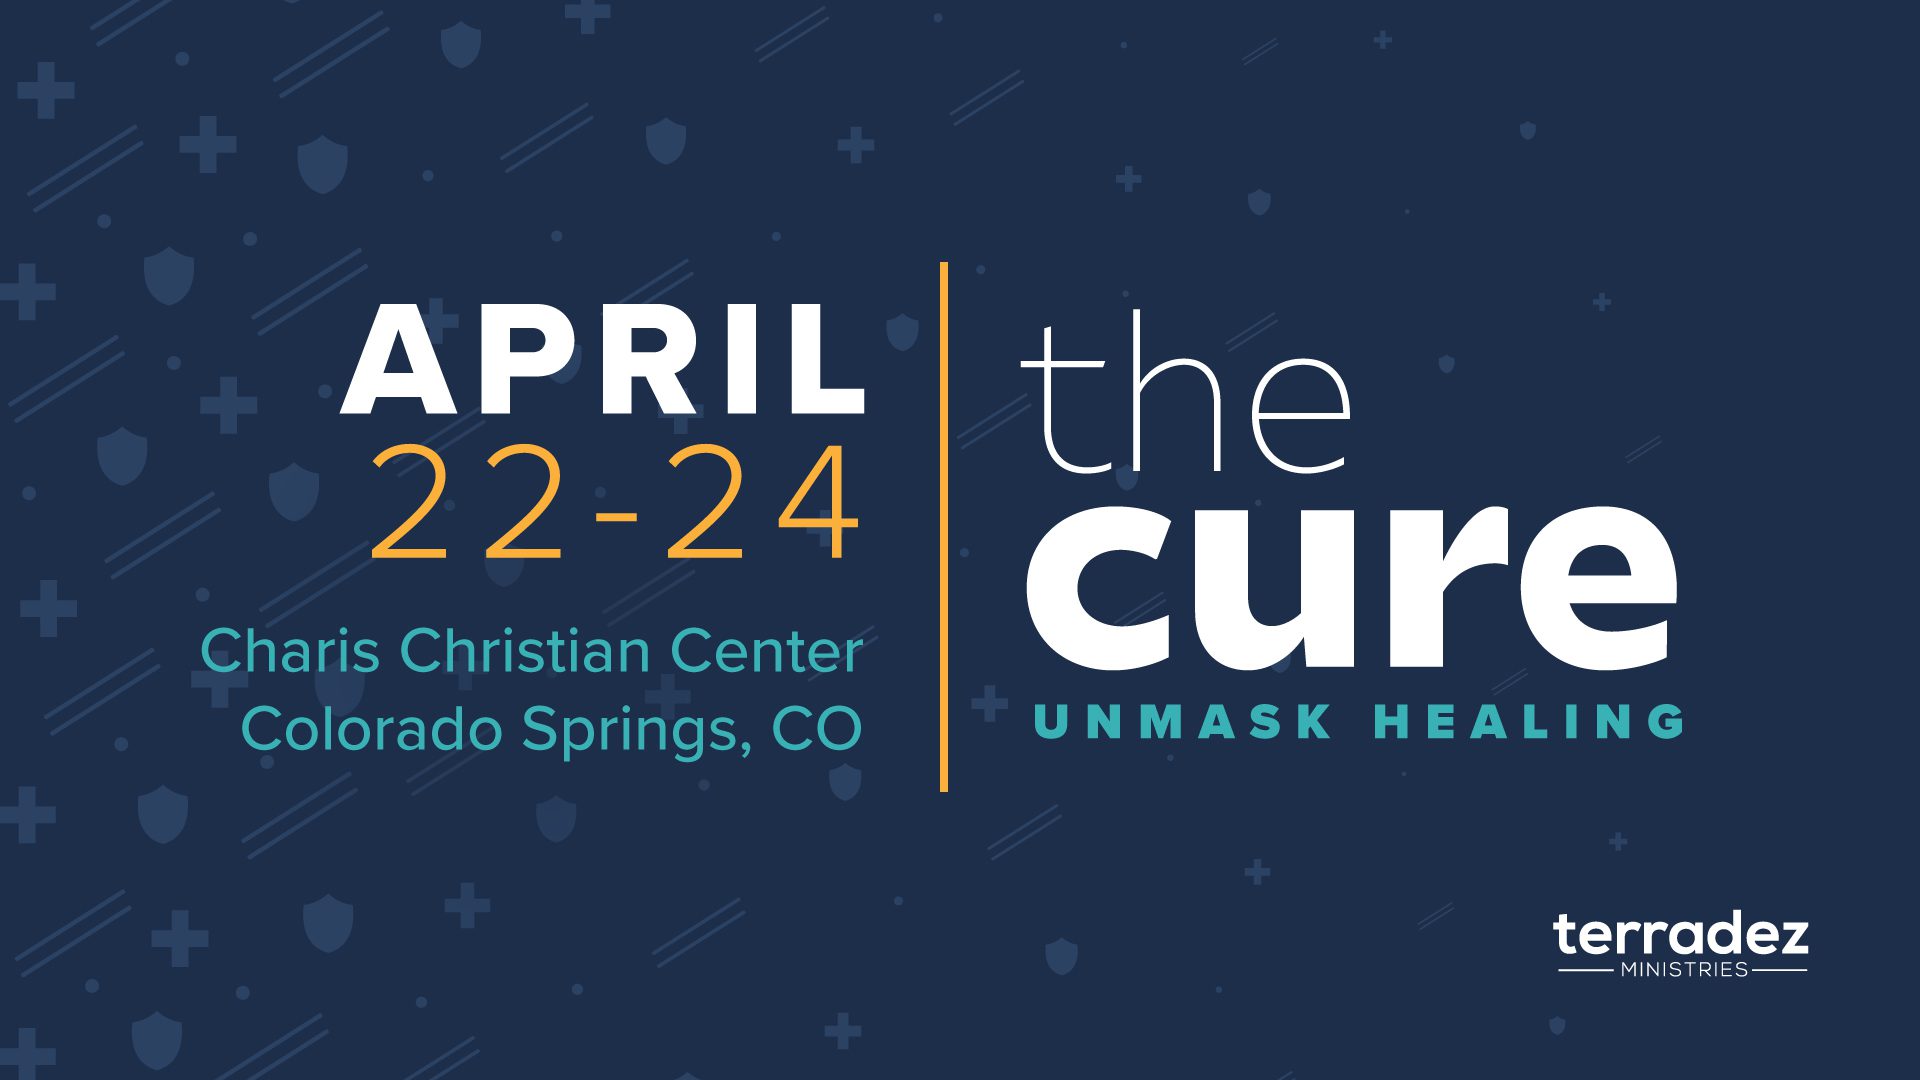 The Cure - Unmask healing with Ashley & Carlie Terradez